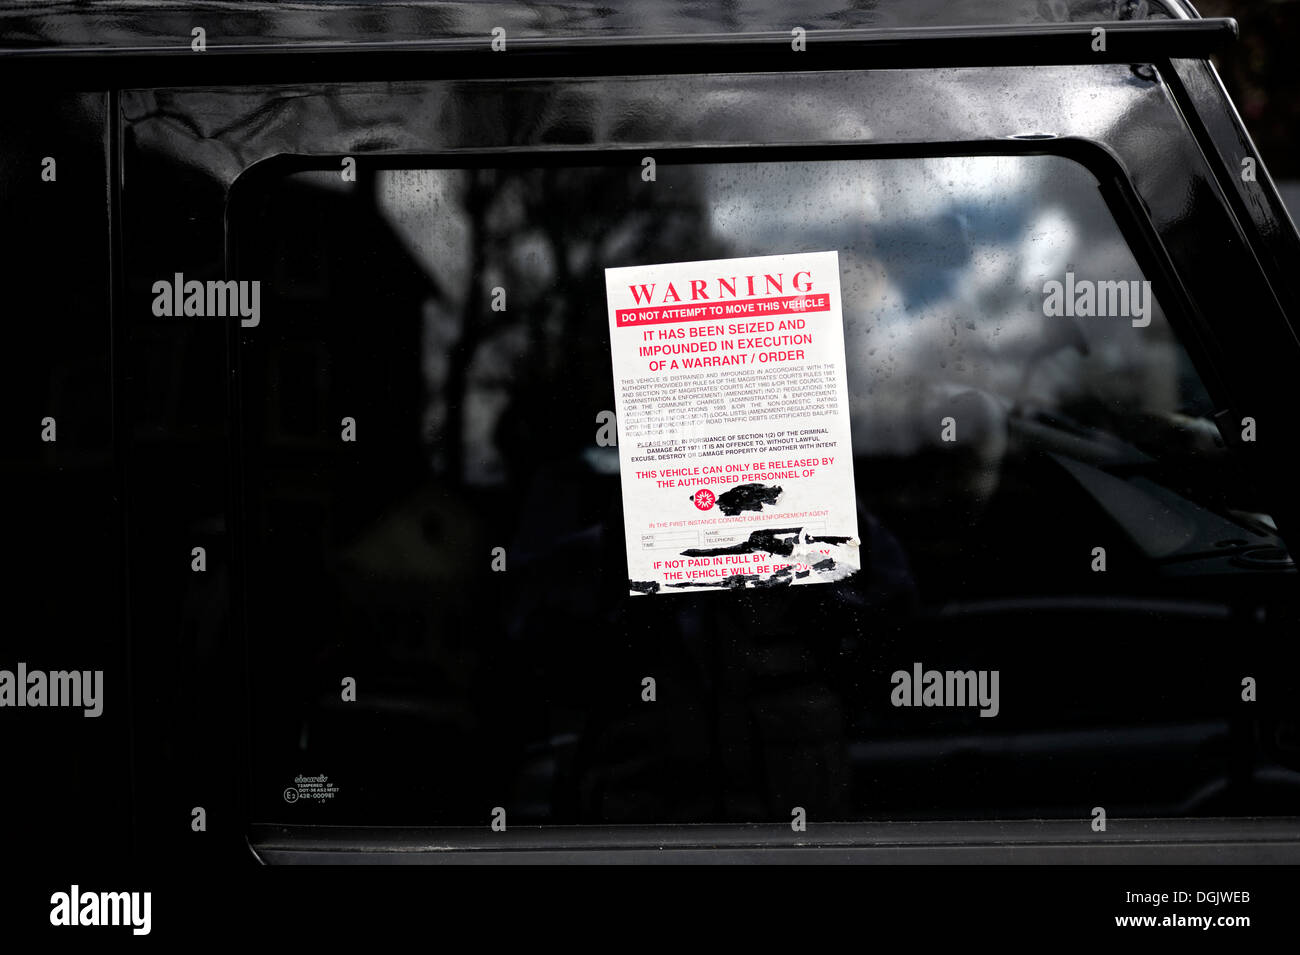 A warning notice stuck on the window of an illegally parked vehicle. Stock Photo